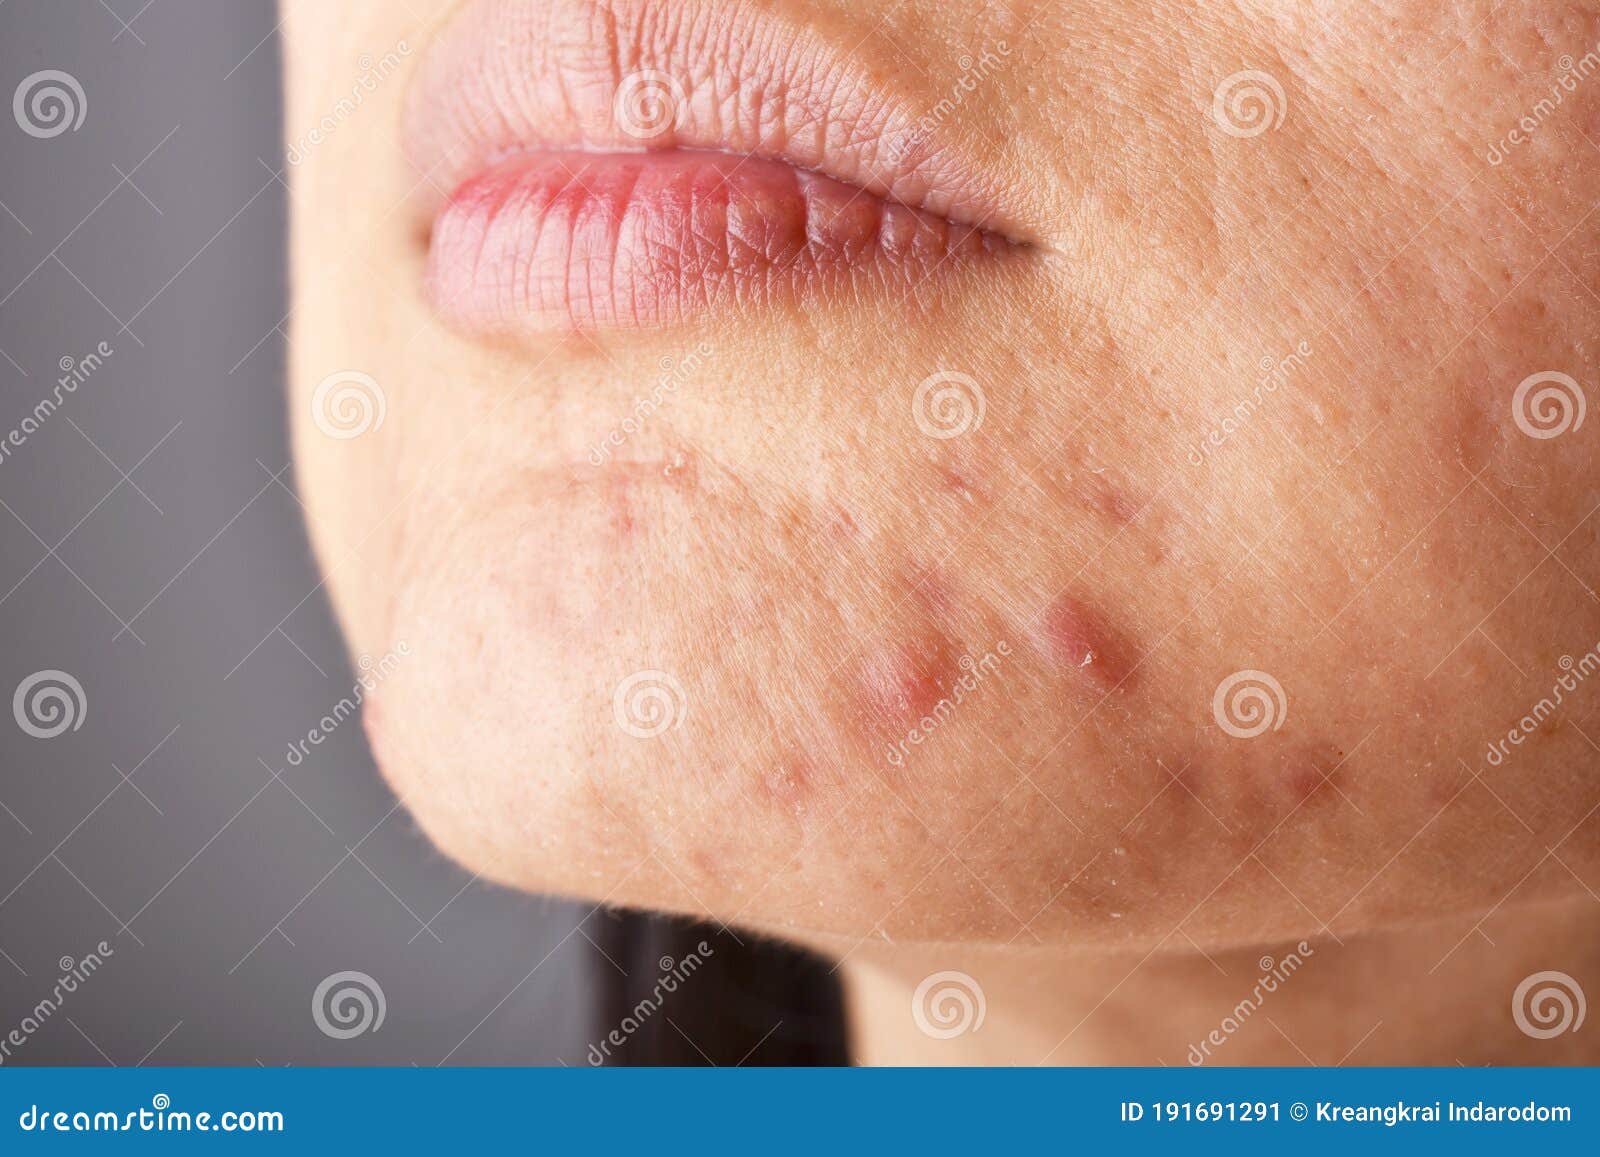 skin problem with acne diseases, close up woman face with whitehead pimples on chin, menstruation breakout